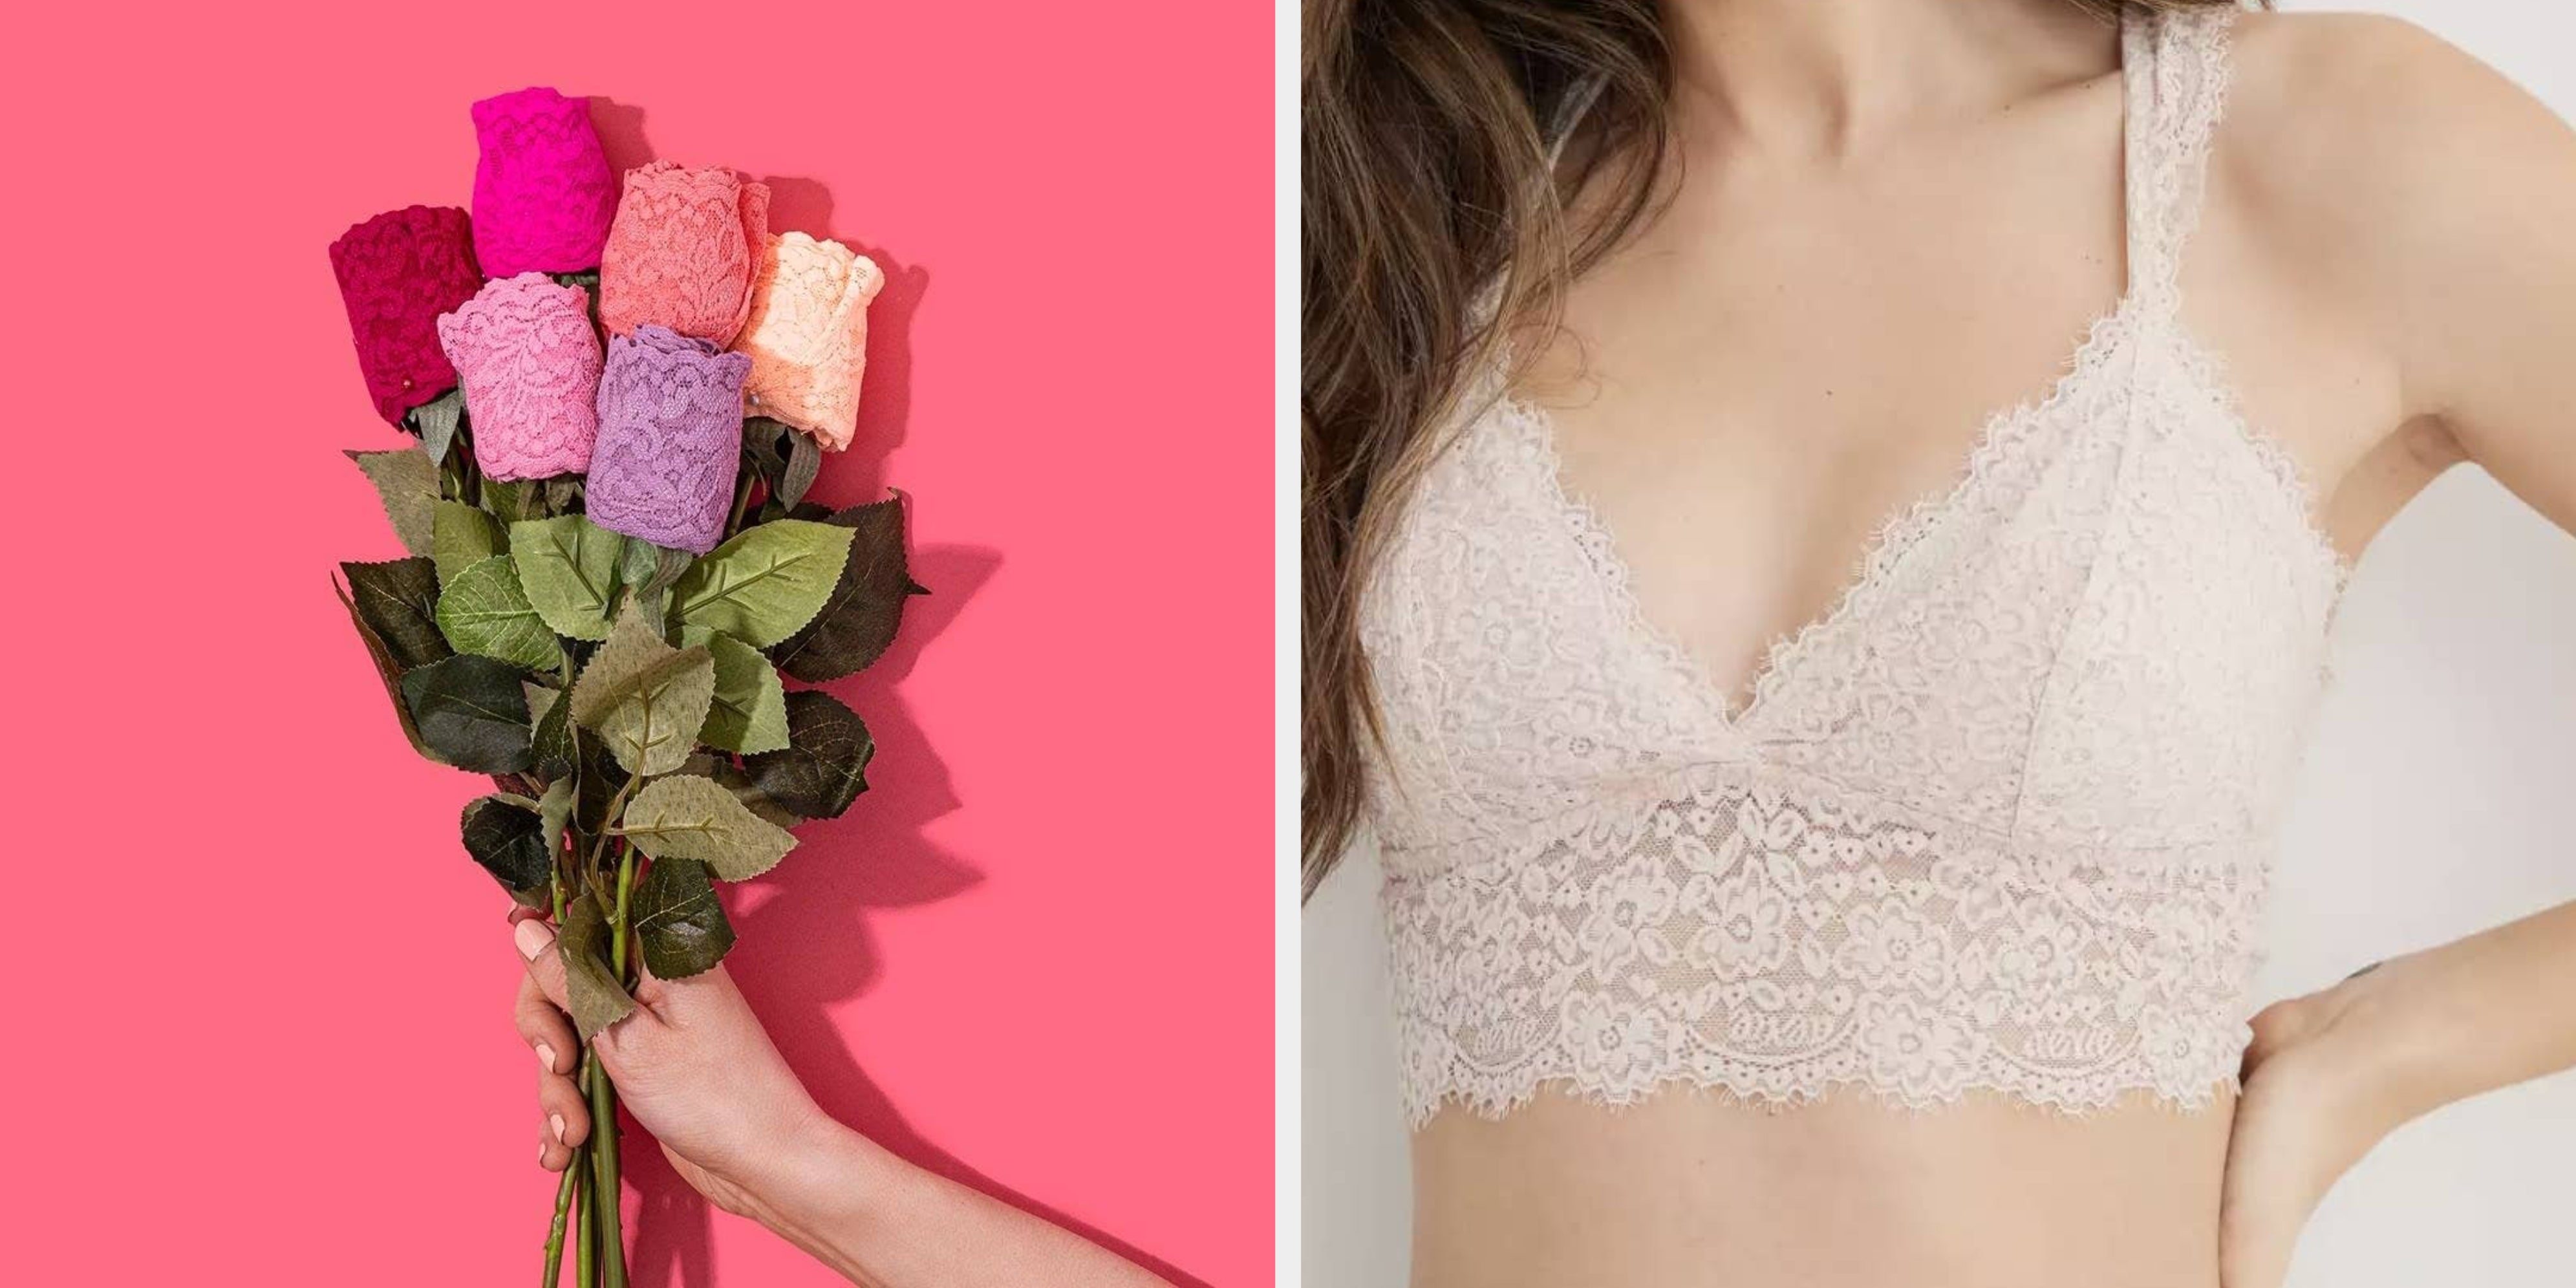 Romantic Pieces Of Lingerie For Valentine's Day